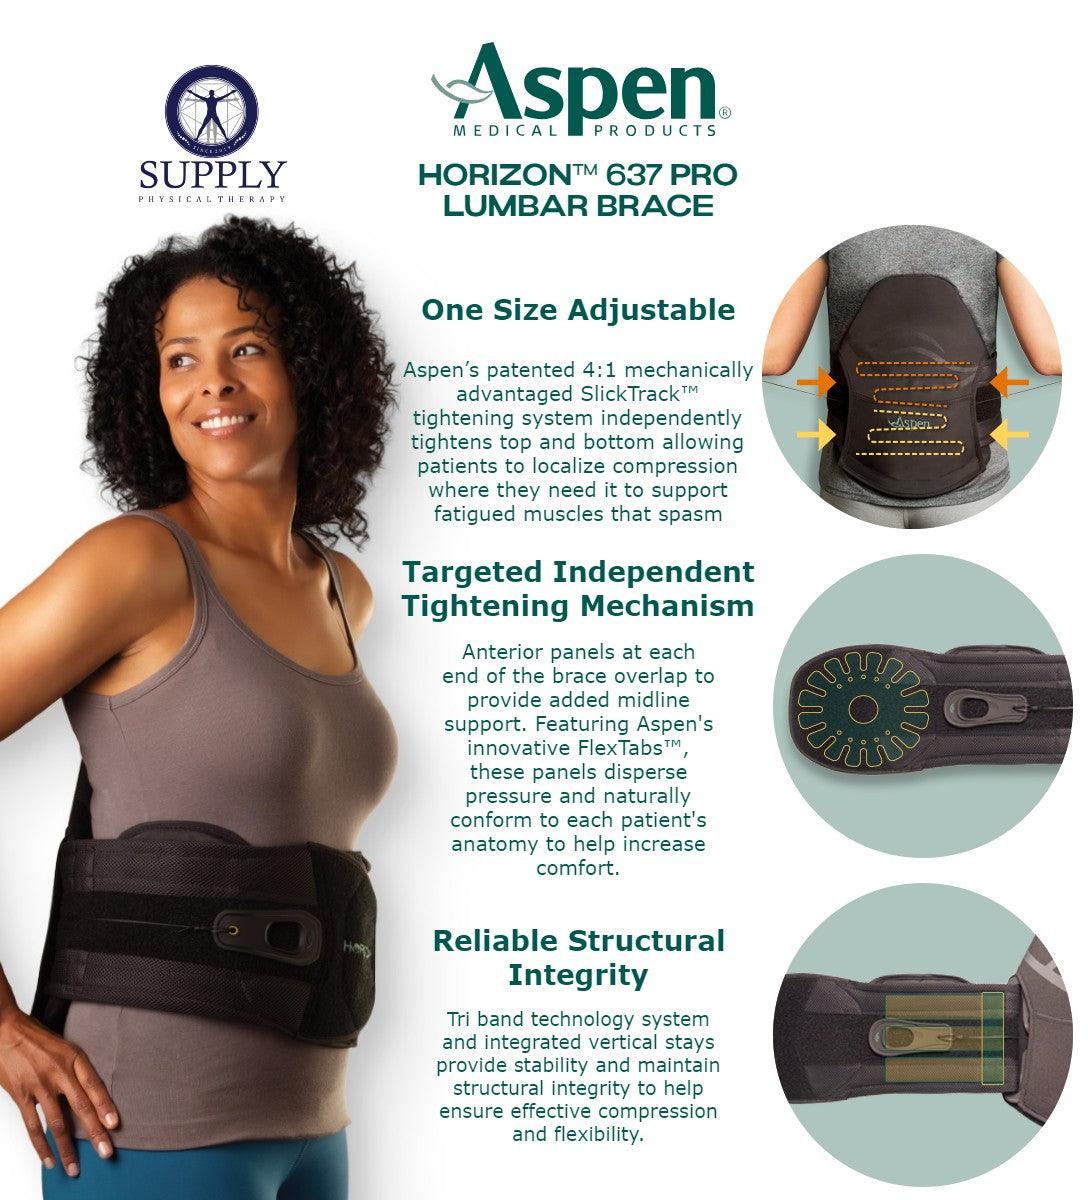 Back Support Belt - Provide stability for those suffering from